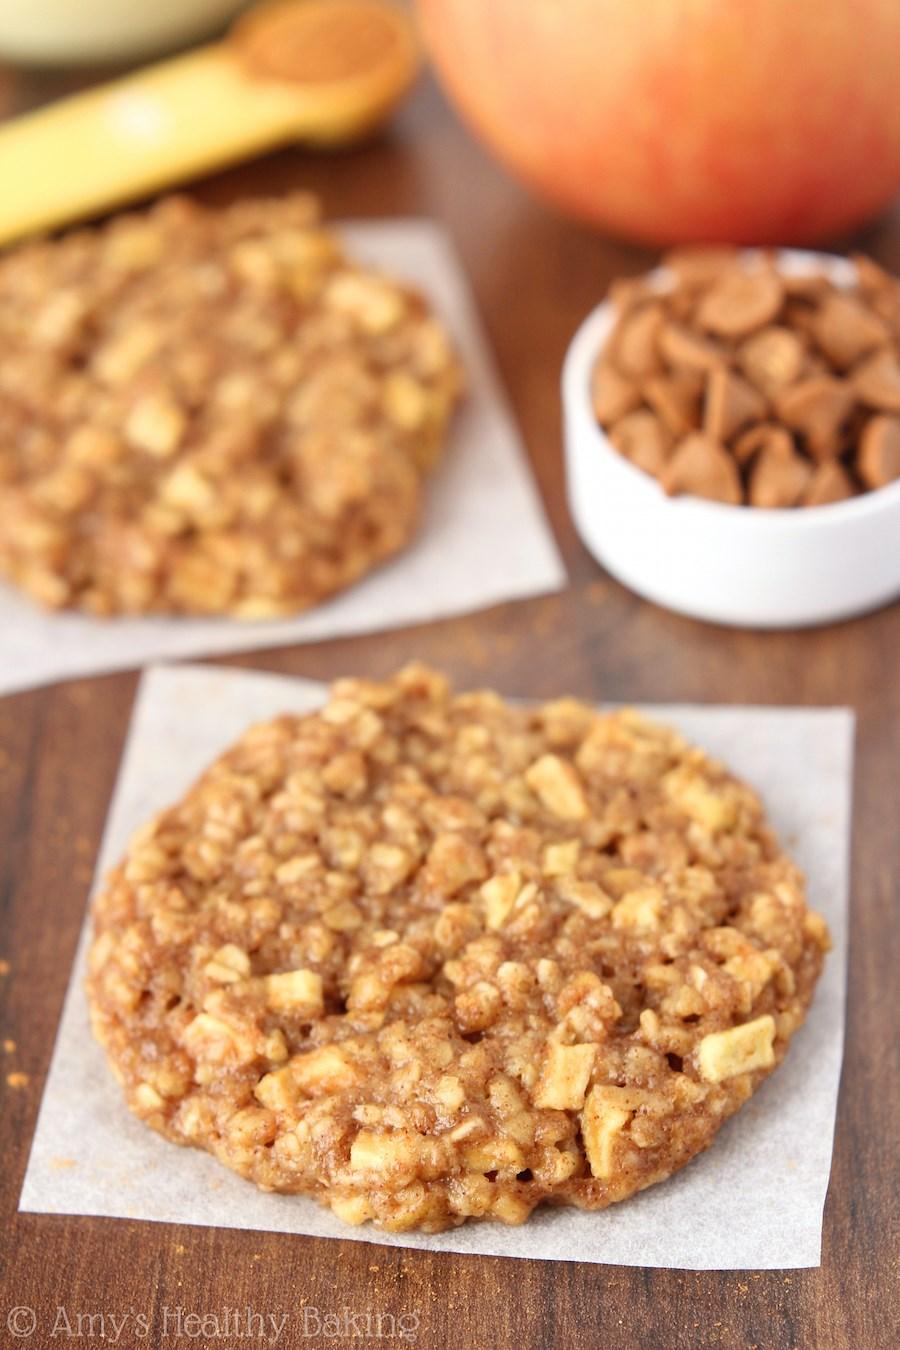 Apple Pie Oatmeal Cookies 1 cup instant oats 3/4 cup whole wheat flour 1 1/2 tsp baking powder 1 1/2 tsp ground cinnamon 1/8 tsp salt 2 tbsp unsalted butter, melted 1 large egg, room temperature 1